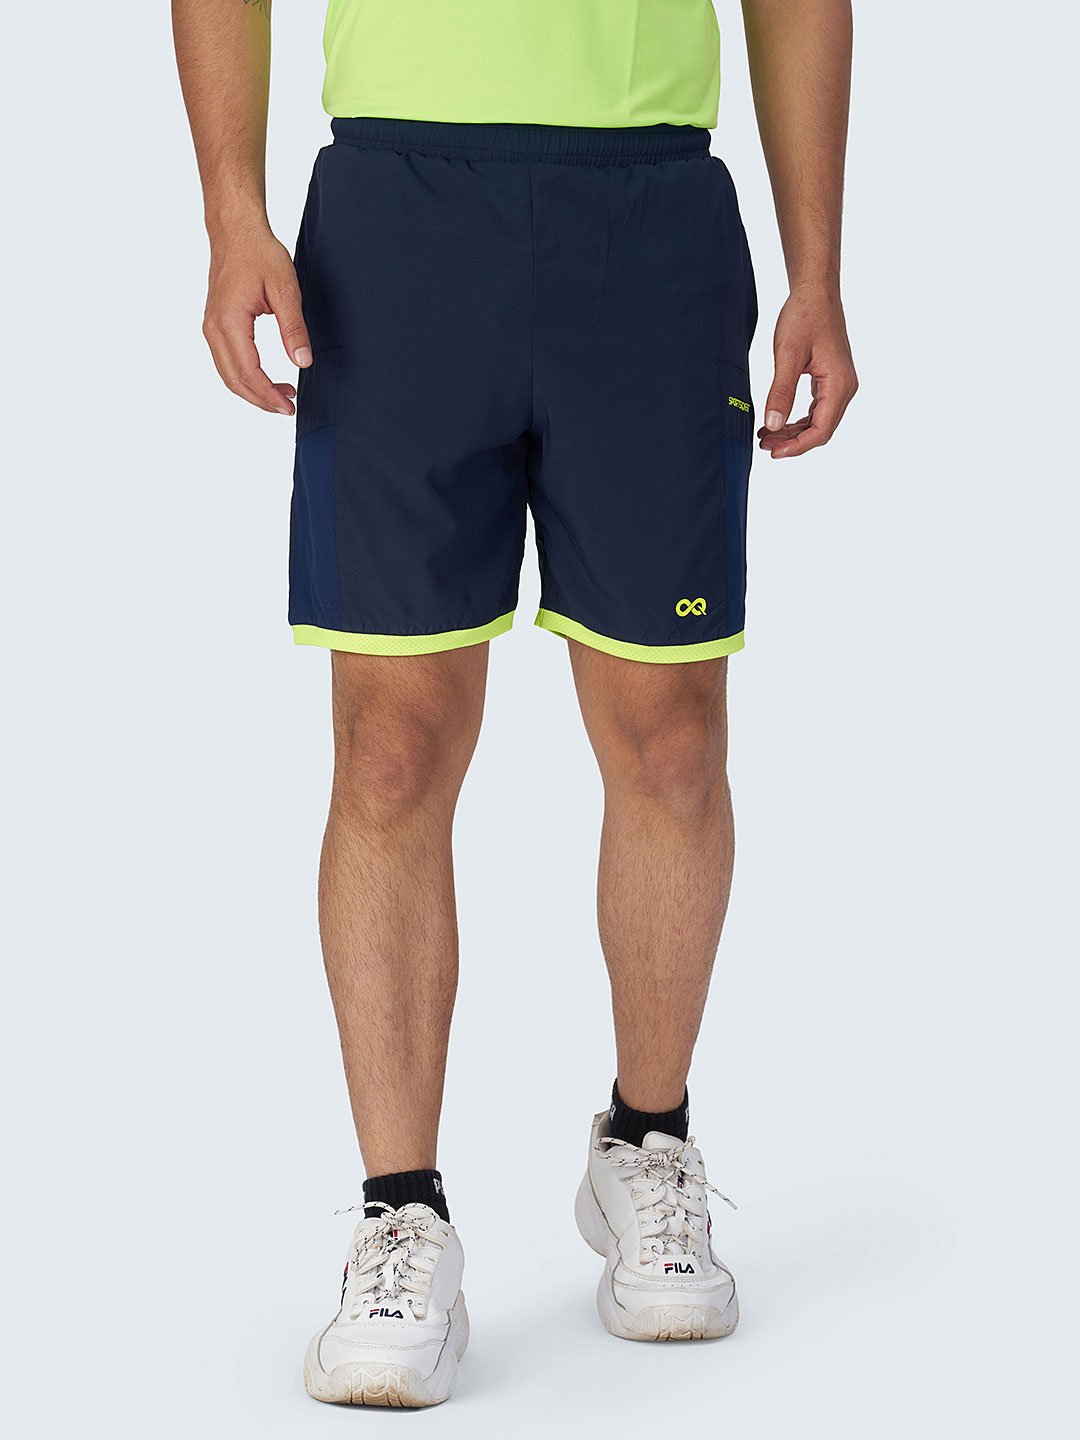 Men's Active Sports Shorts with Neon Piping